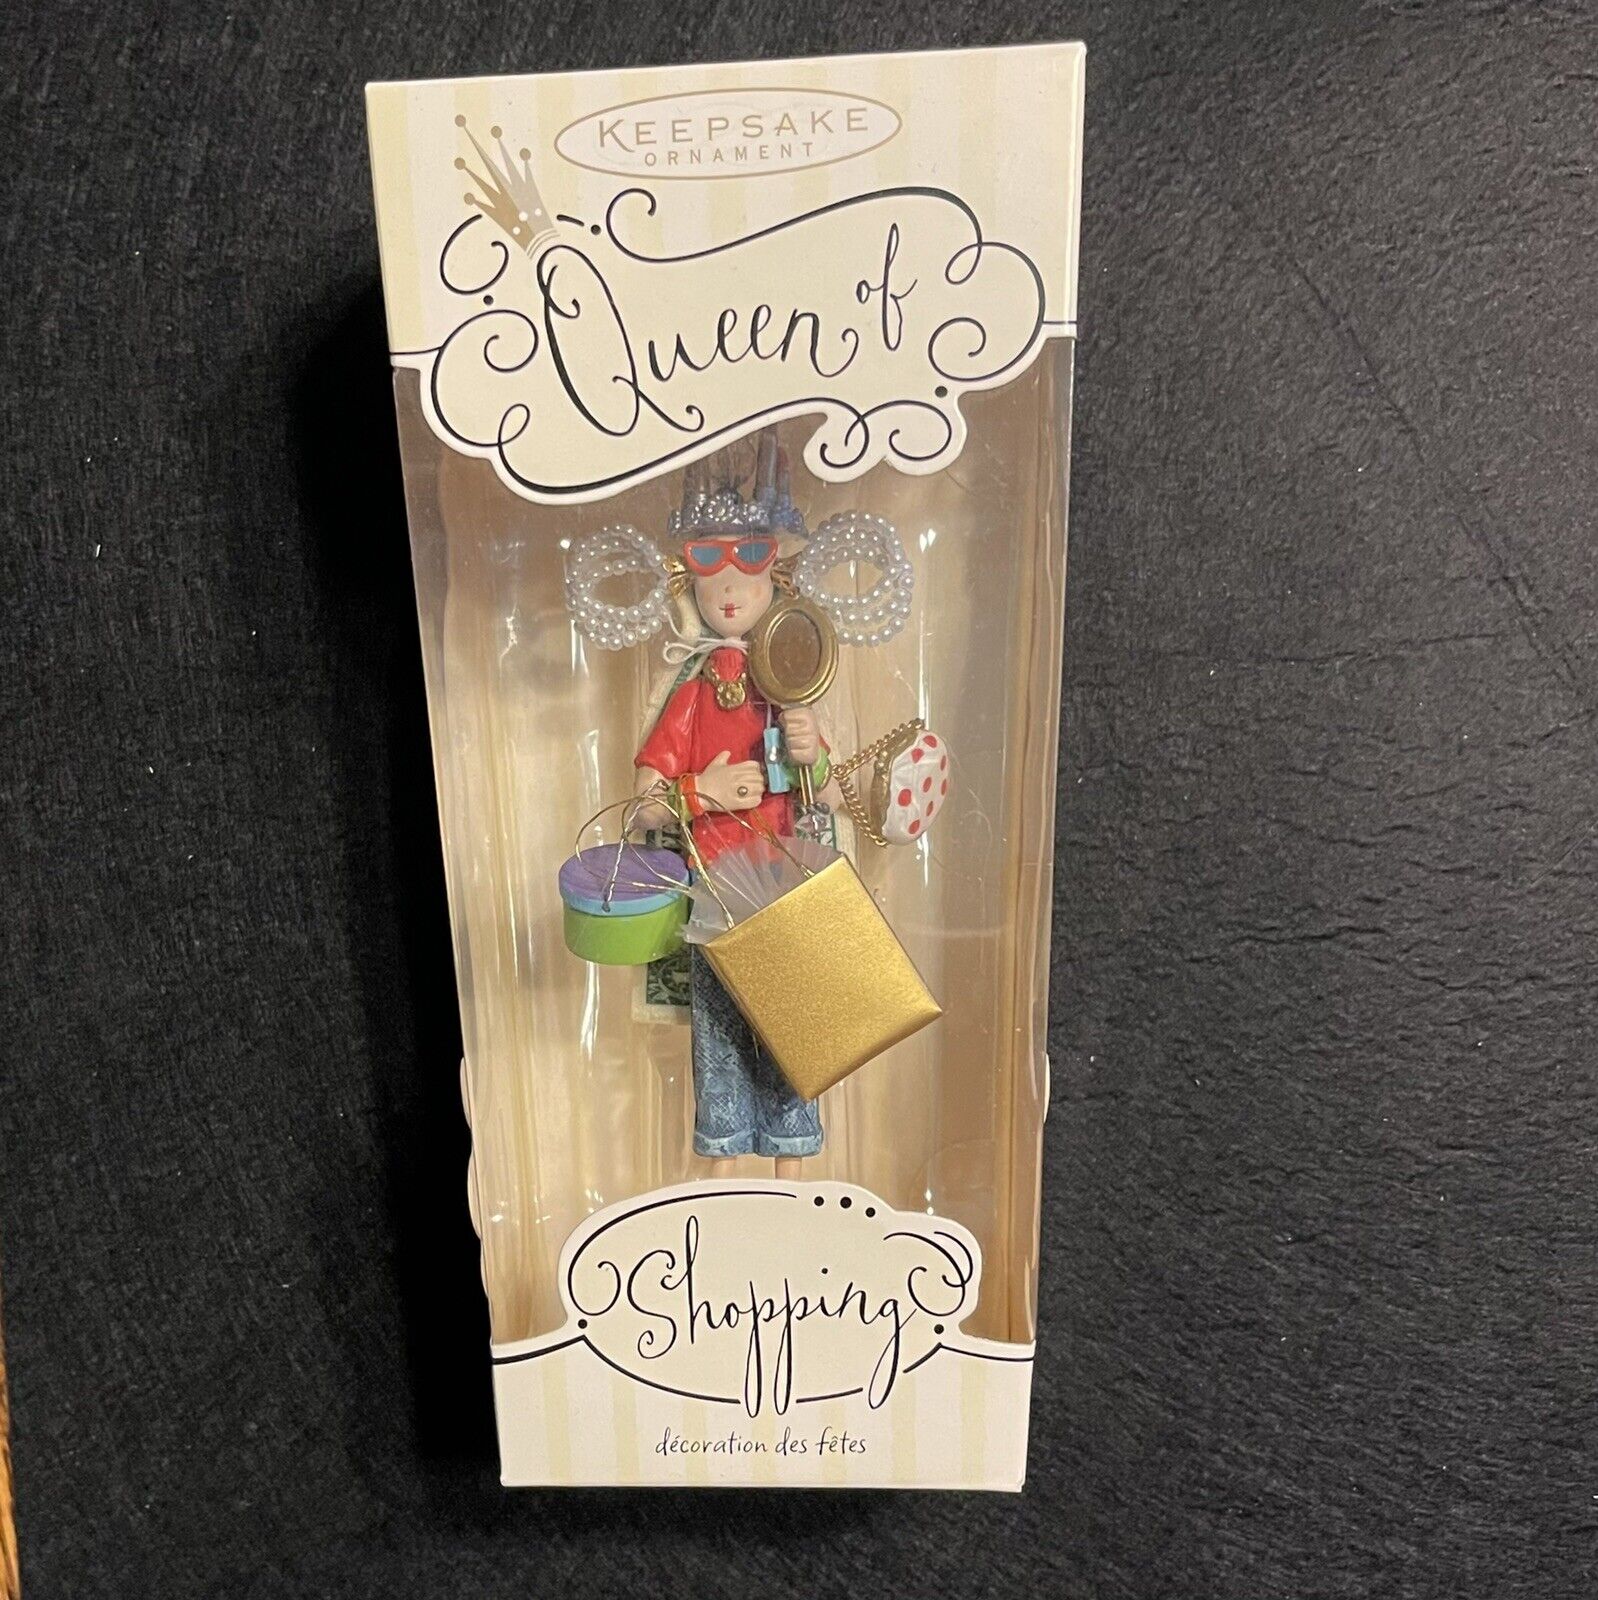 2005 Hallmark Keepsake Christmas Ornament Queen of Shopping with Box. Never Used